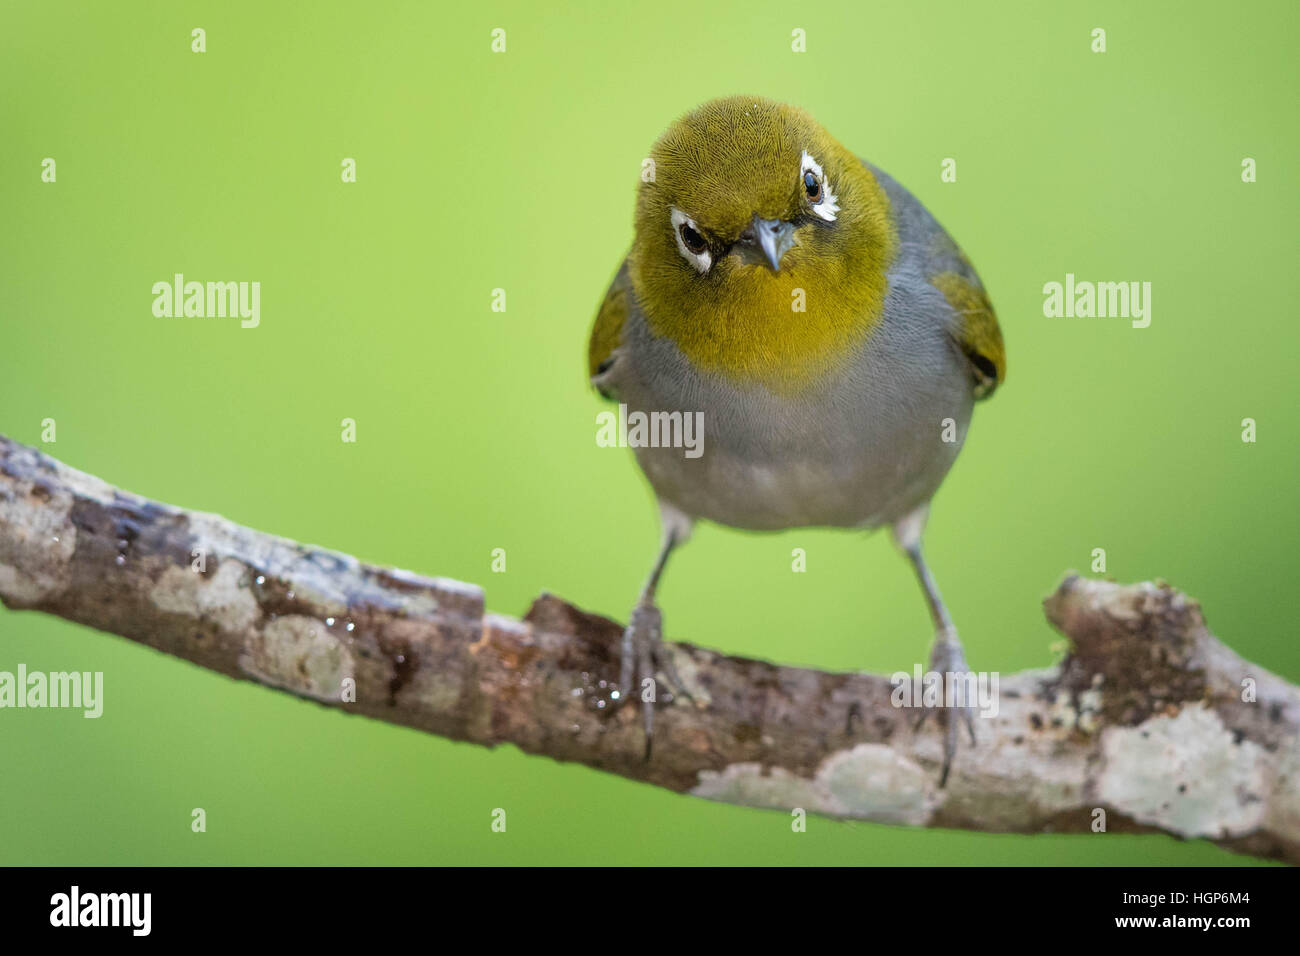 Silvereye (Zosterops lateralis) perched on a branch Stock Photo